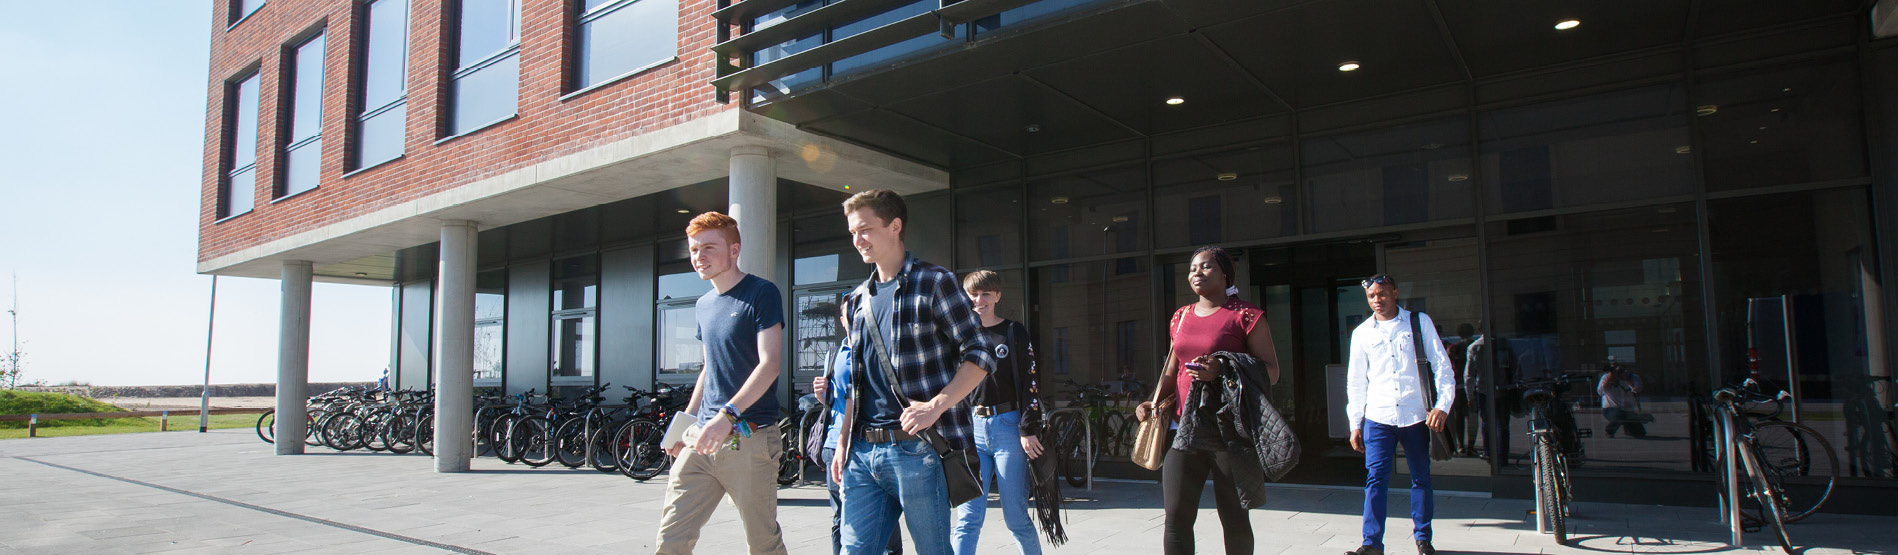 group of students walking out of a building